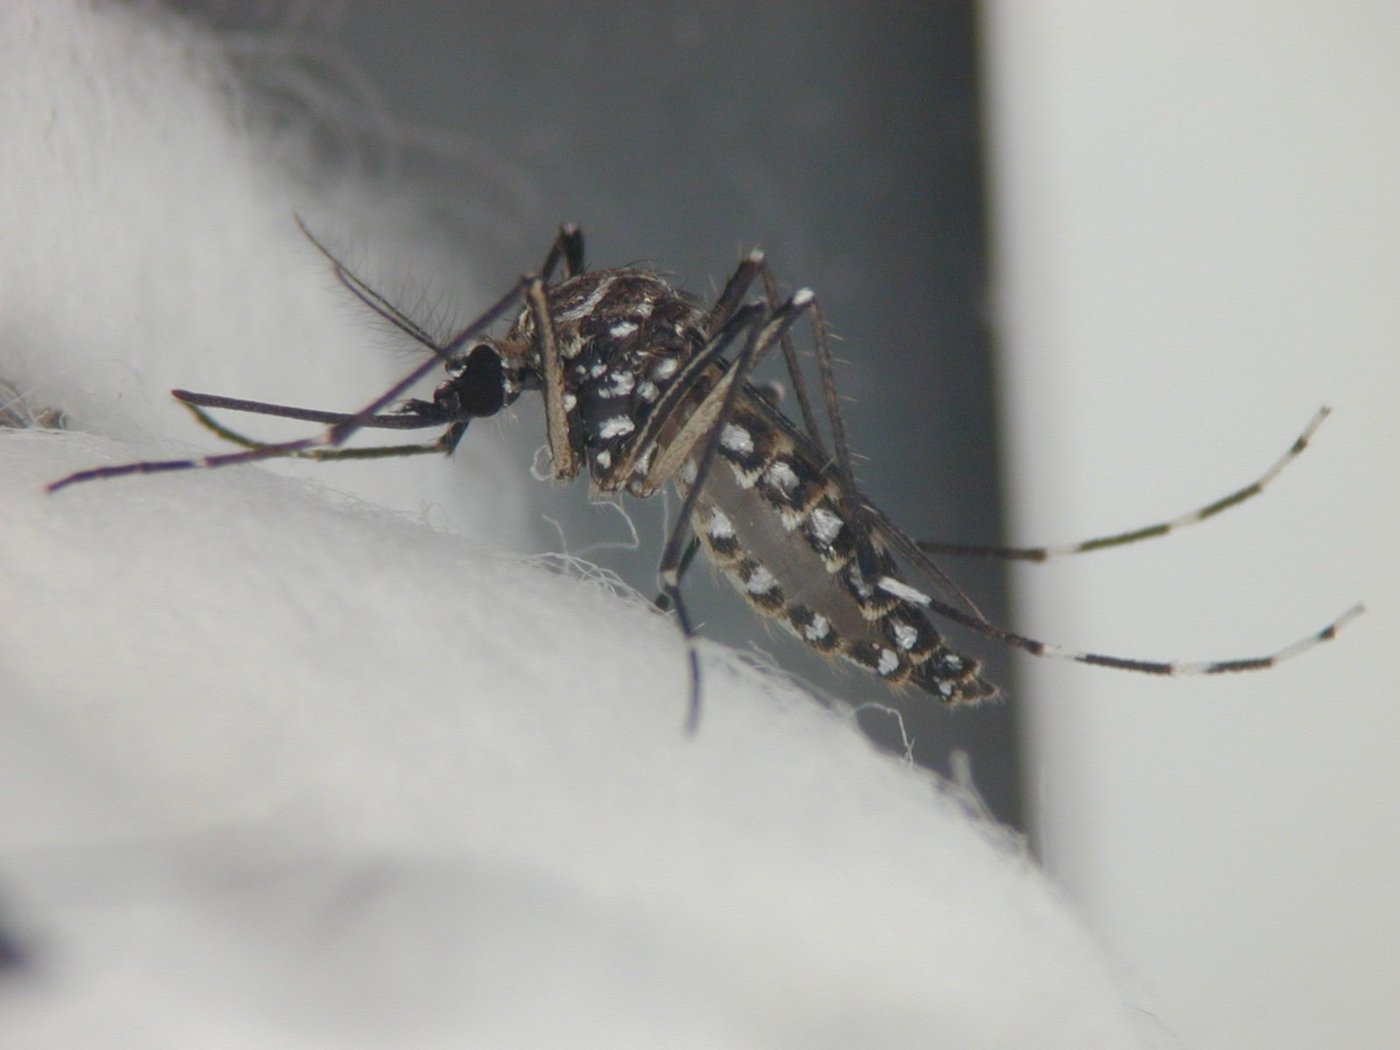 A white-striped mosquito (tiger mosquito) is sitting on cotton wool. The photo is in black and white.